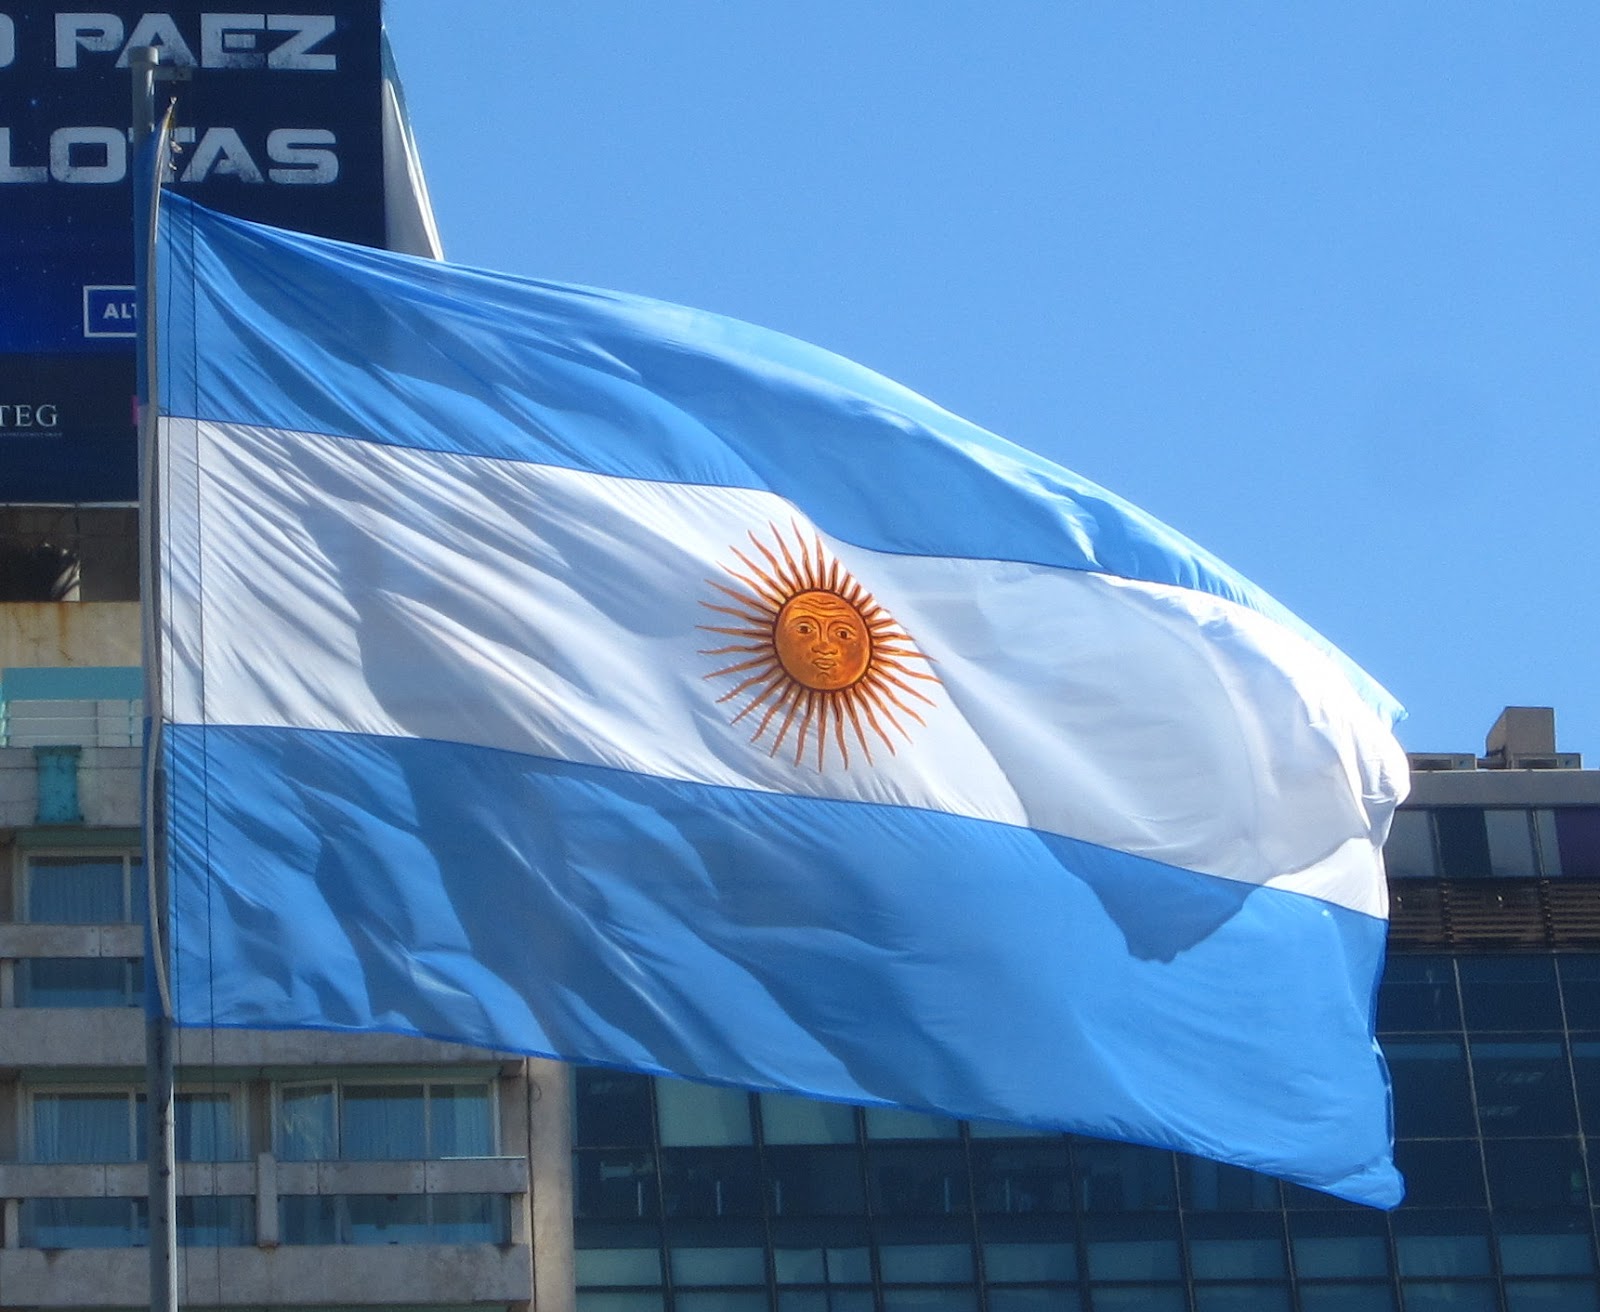 michelle + russ + travel: buenos aires first impressions